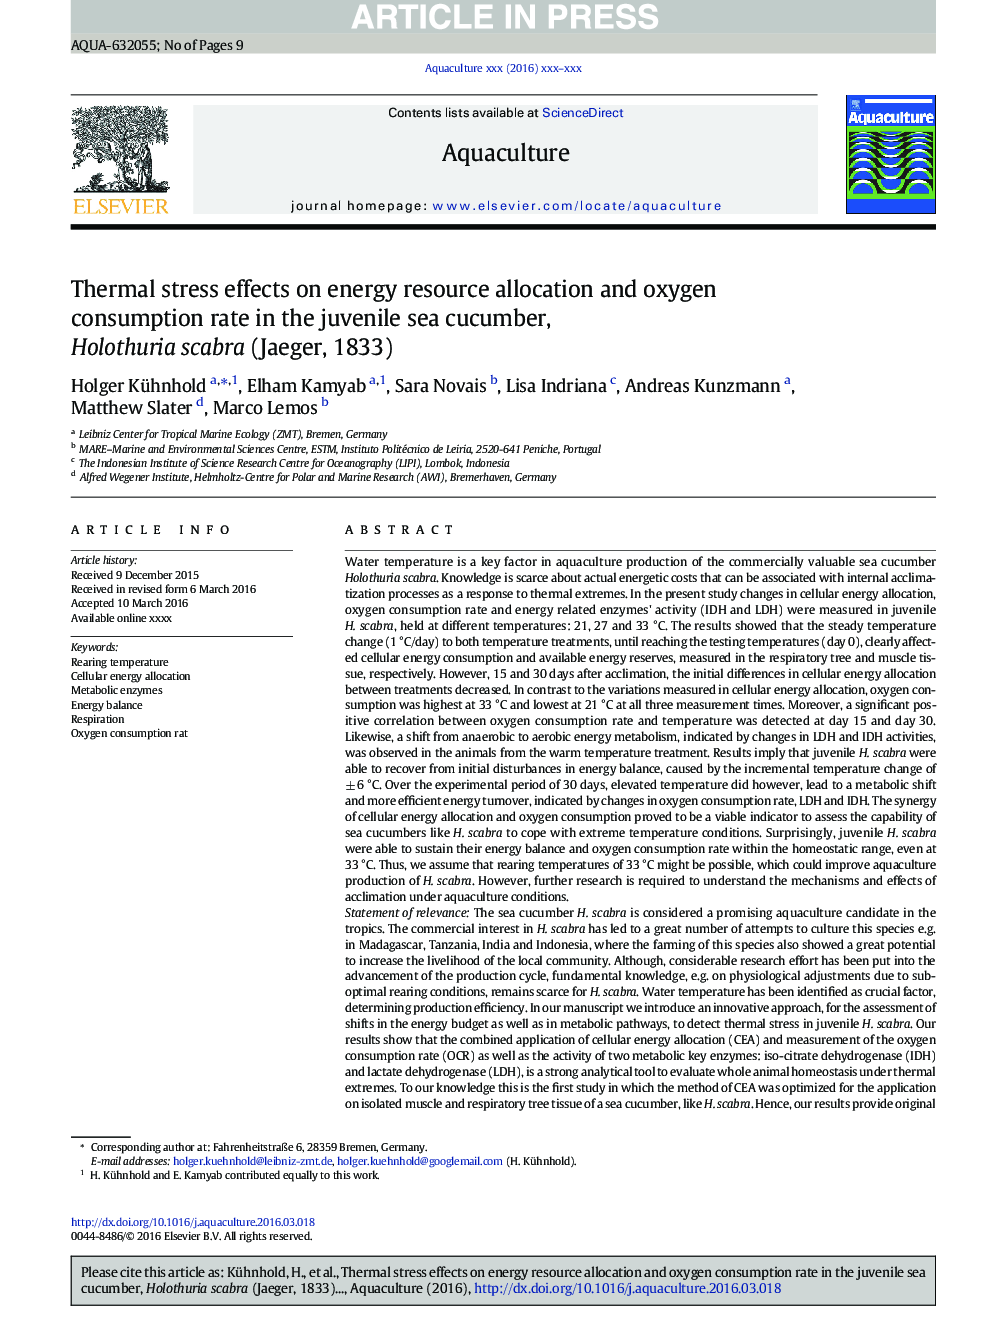 Thermal stress effects on energy resource allocation and oxygen consumption rate in the juvenile sea cucumber, Holothuria scabra (Jaeger, 1833)